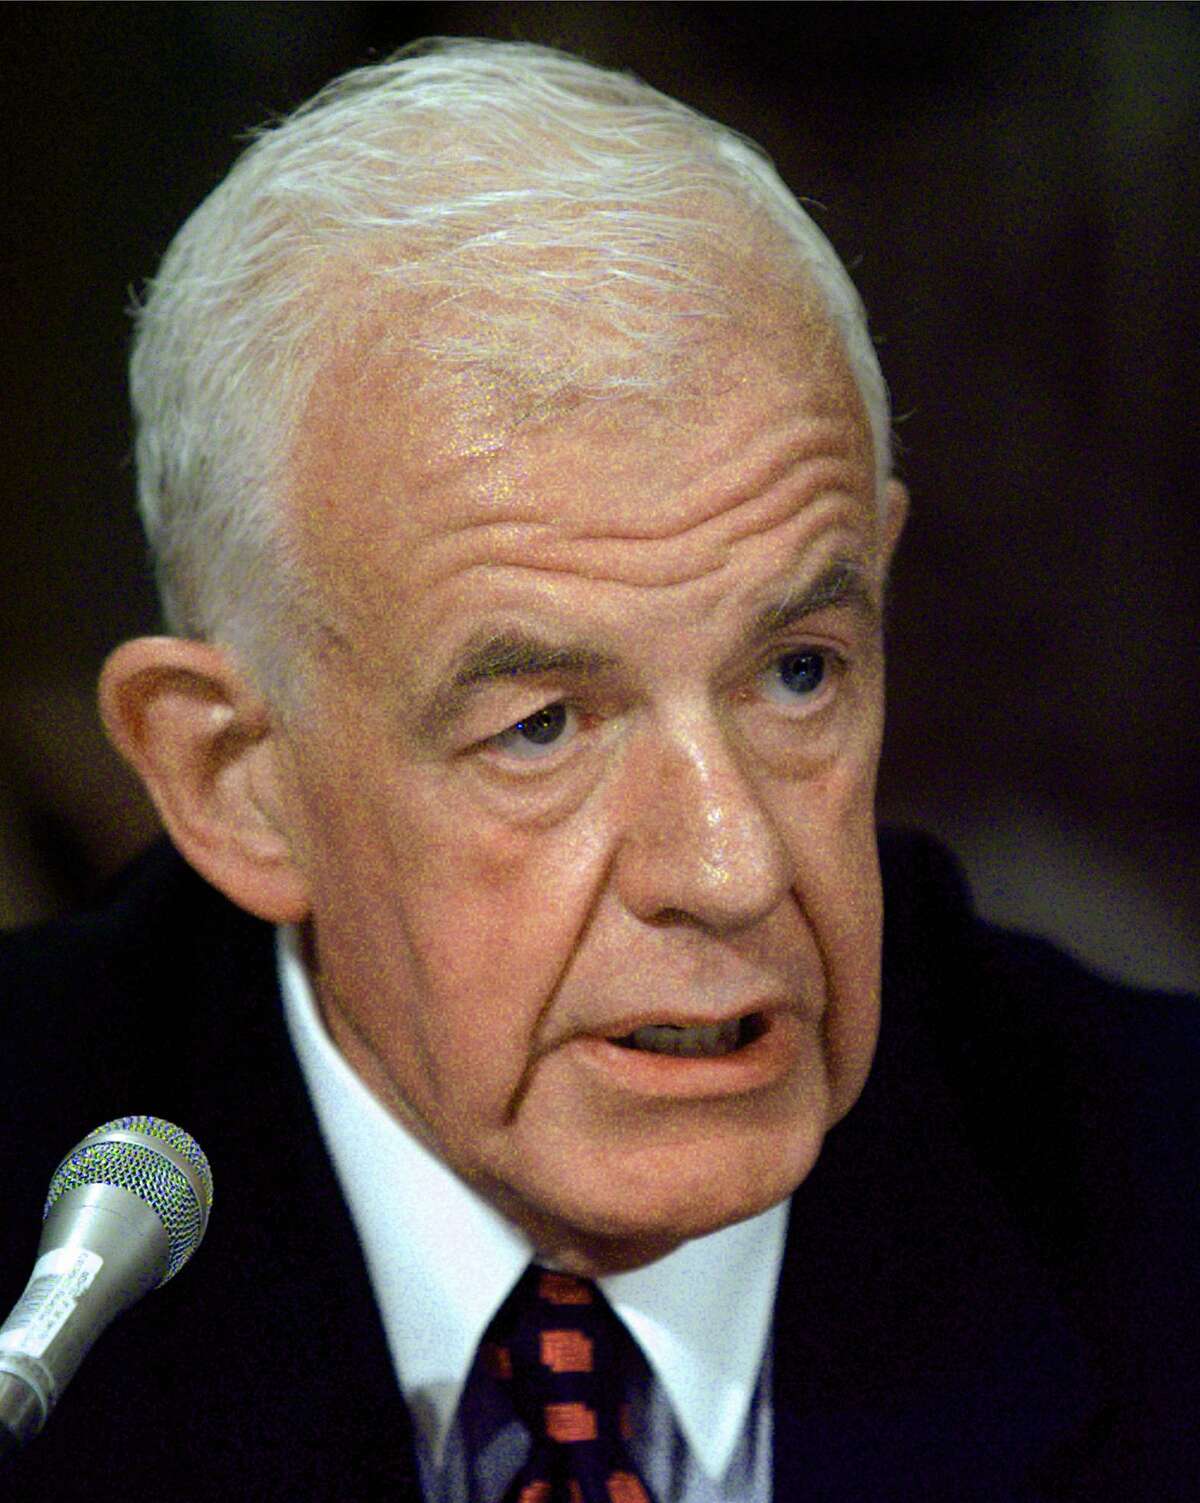 FILE - In this Sept. 24, 1997 file photo, former House Speaker Tom Foley testifies on Capitol Hill before the Senate Foreign Relations Committee hearing on his nomination to become ambassador to Japan. Foley has died at the age of 84, according to House Democratic aides on Friday, Oct. 18, 2013, who spoke on condition of anonymity. Foley was a Washington state lawmaker who became the first speaker since the Civil War who failed to win re-election in his home district. He was U.S. ambassador to Japan for four years during the Clinton administration. But he spent the most time in the House, serving 30 years including more than five as speaker. (AP Photo/Joe Marquette, file) ORG XMIT: NY127